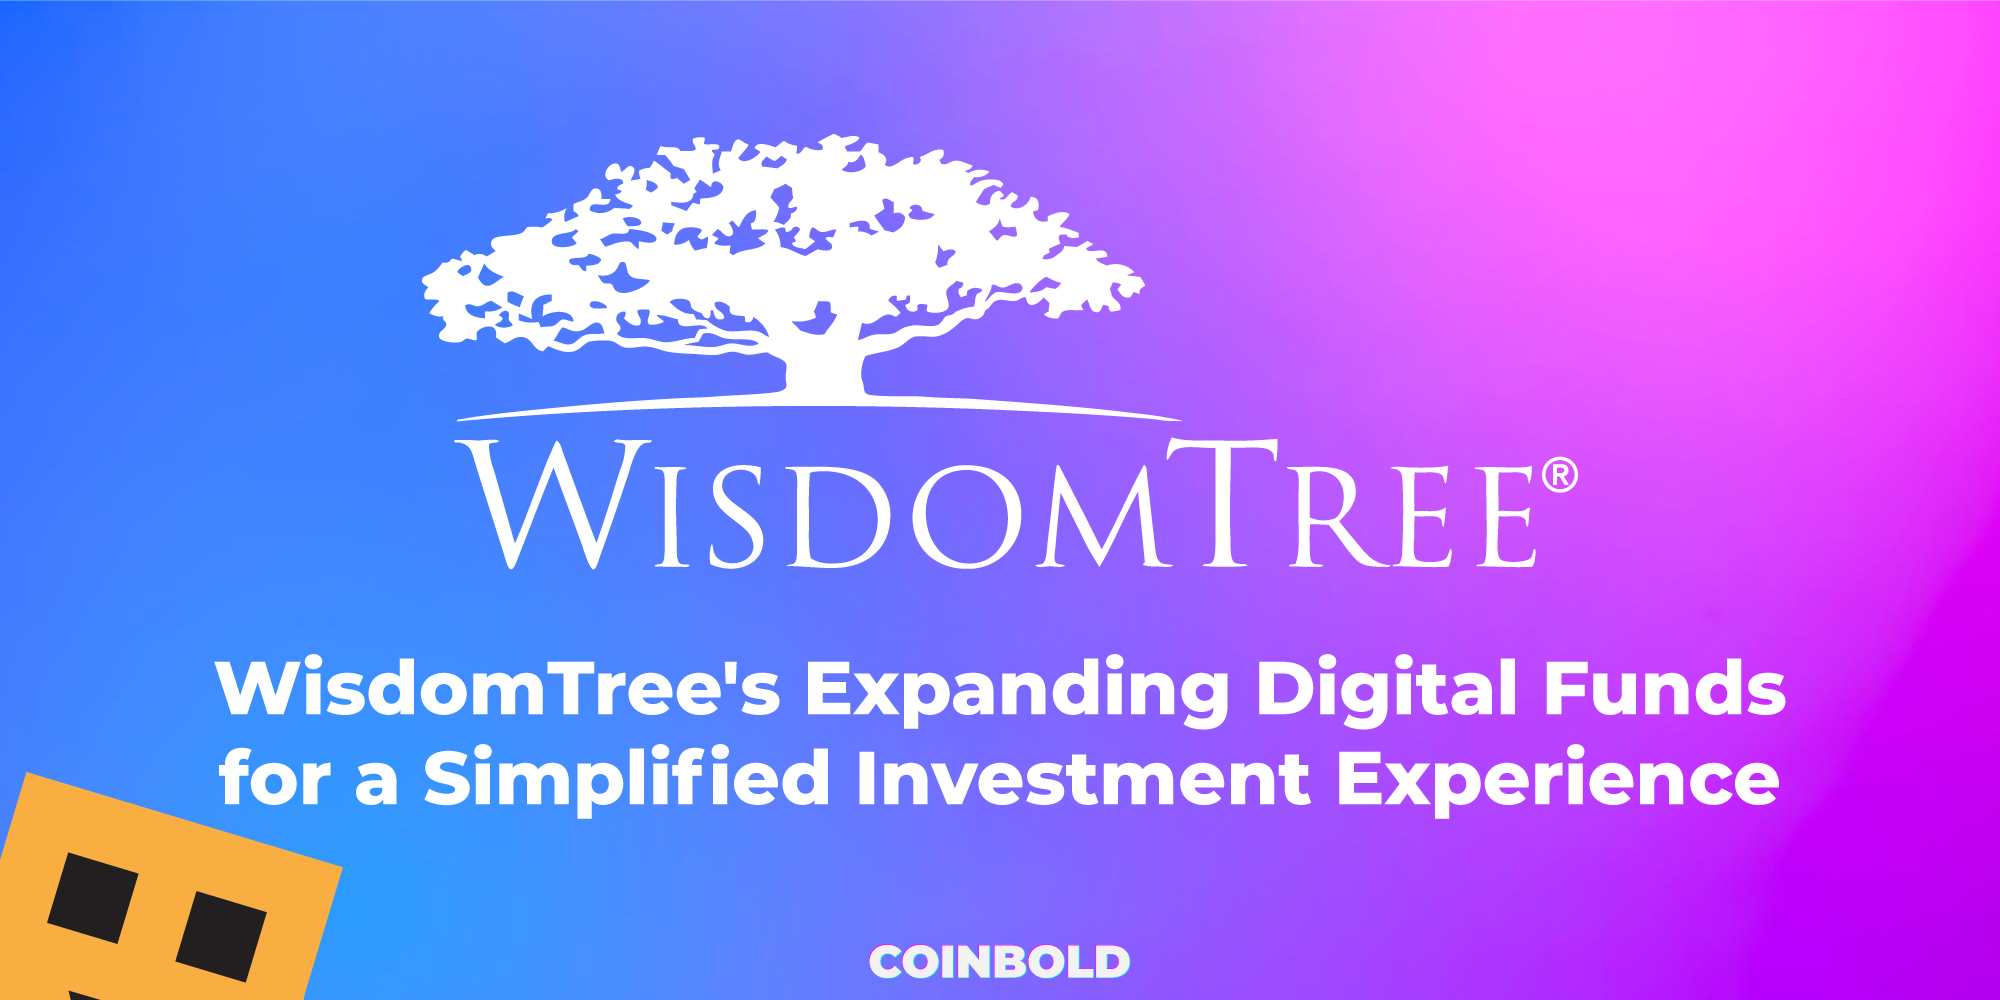 WisdomTree's Expanding Digital Funds for a Simplified Investment Experience